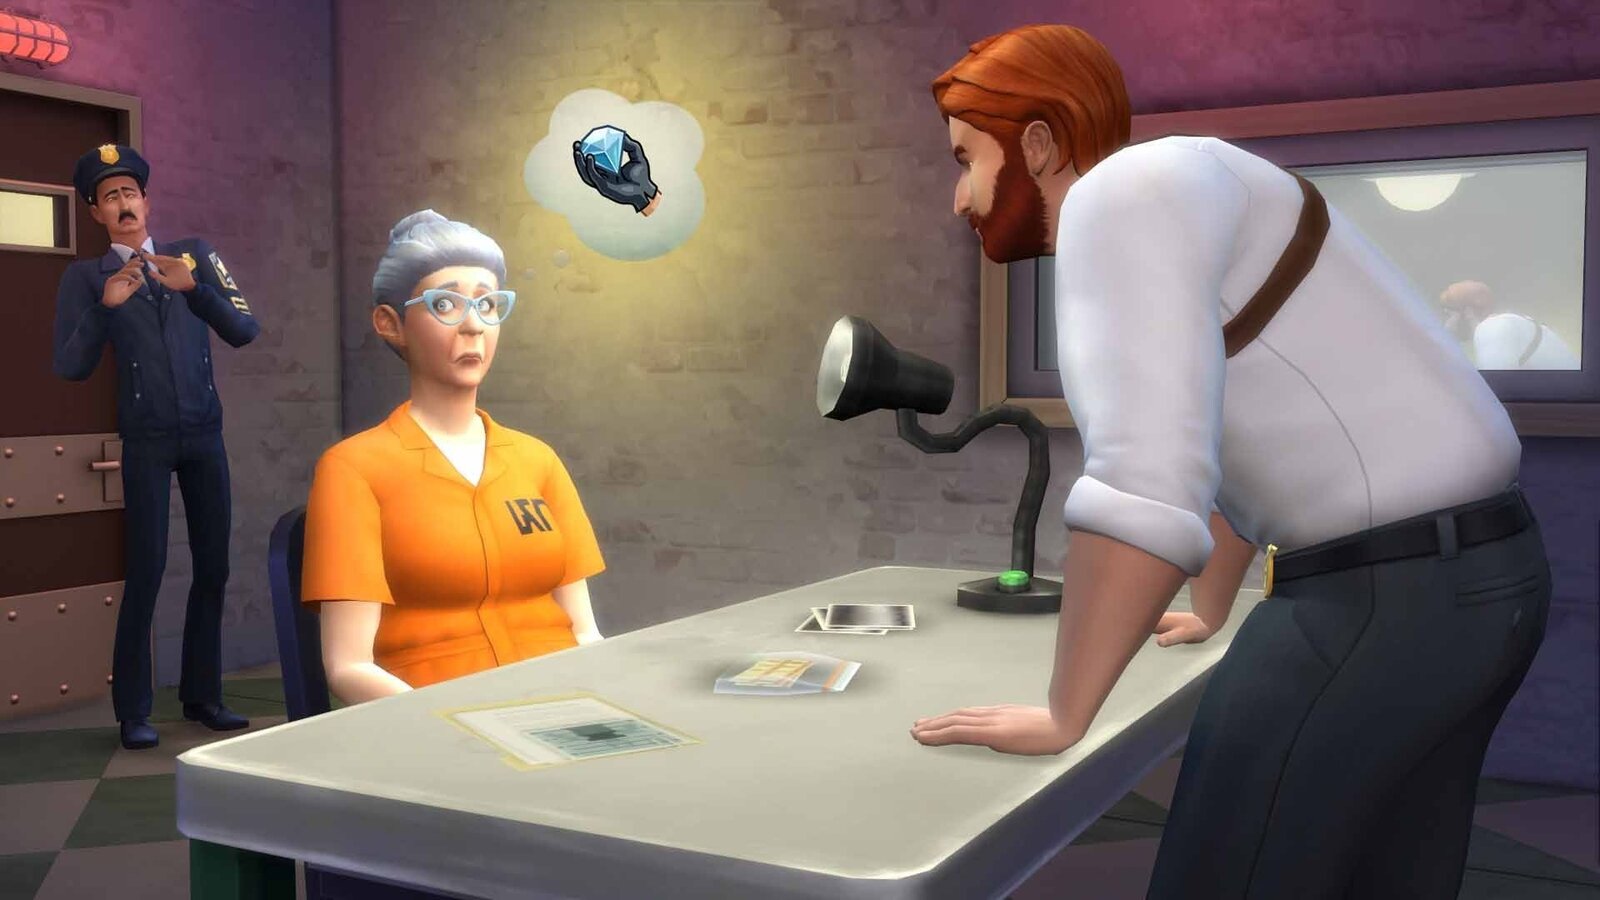 The Sims 4: Get To Work